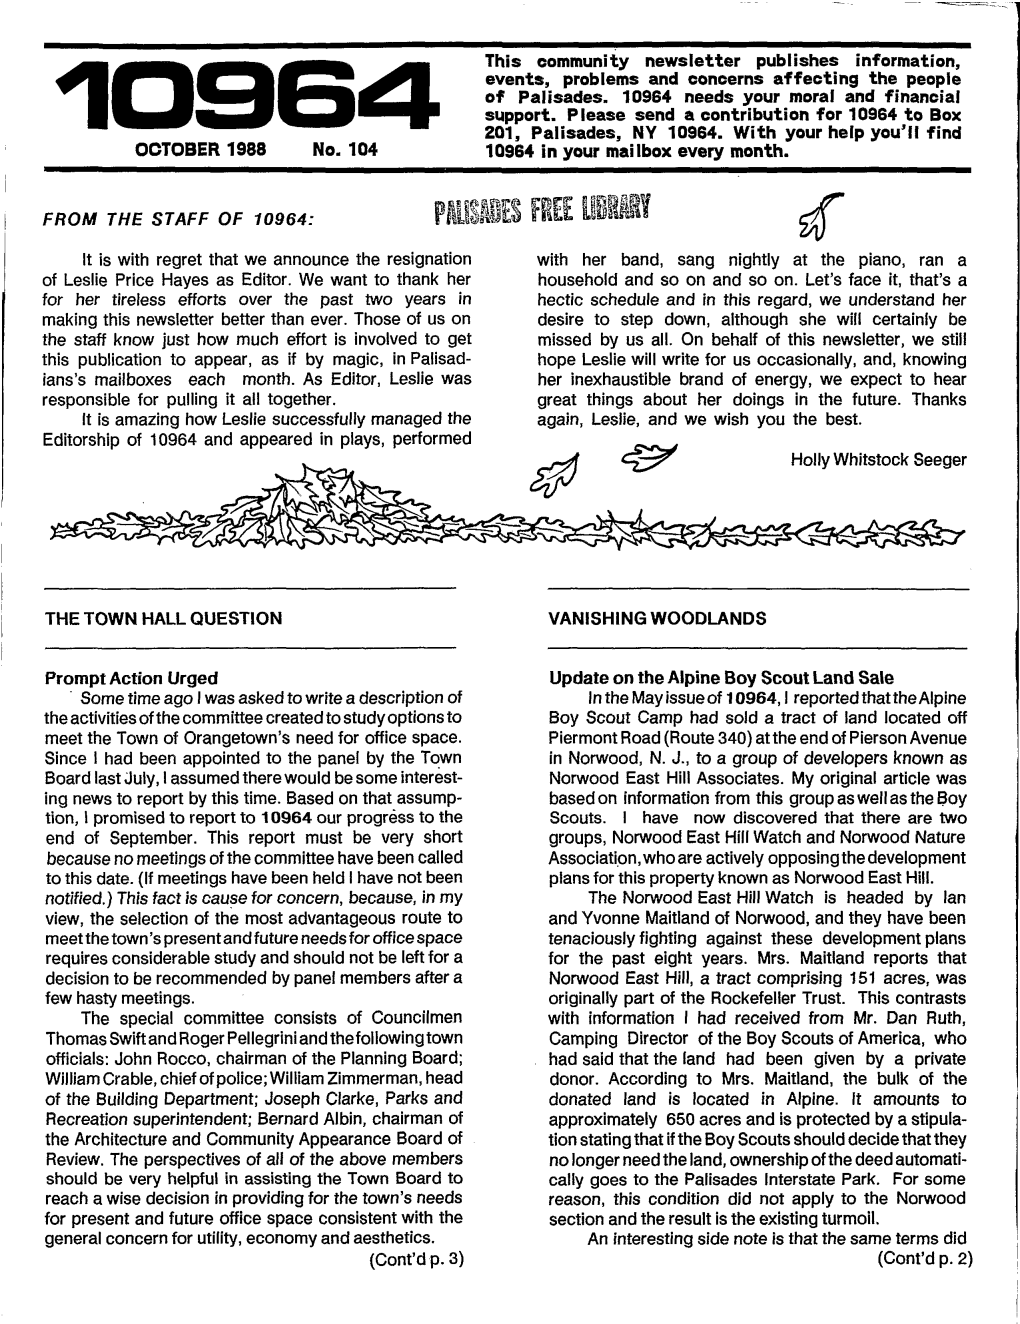 OCTOBER 1988 No. 104 This Community Newsletter Publishes